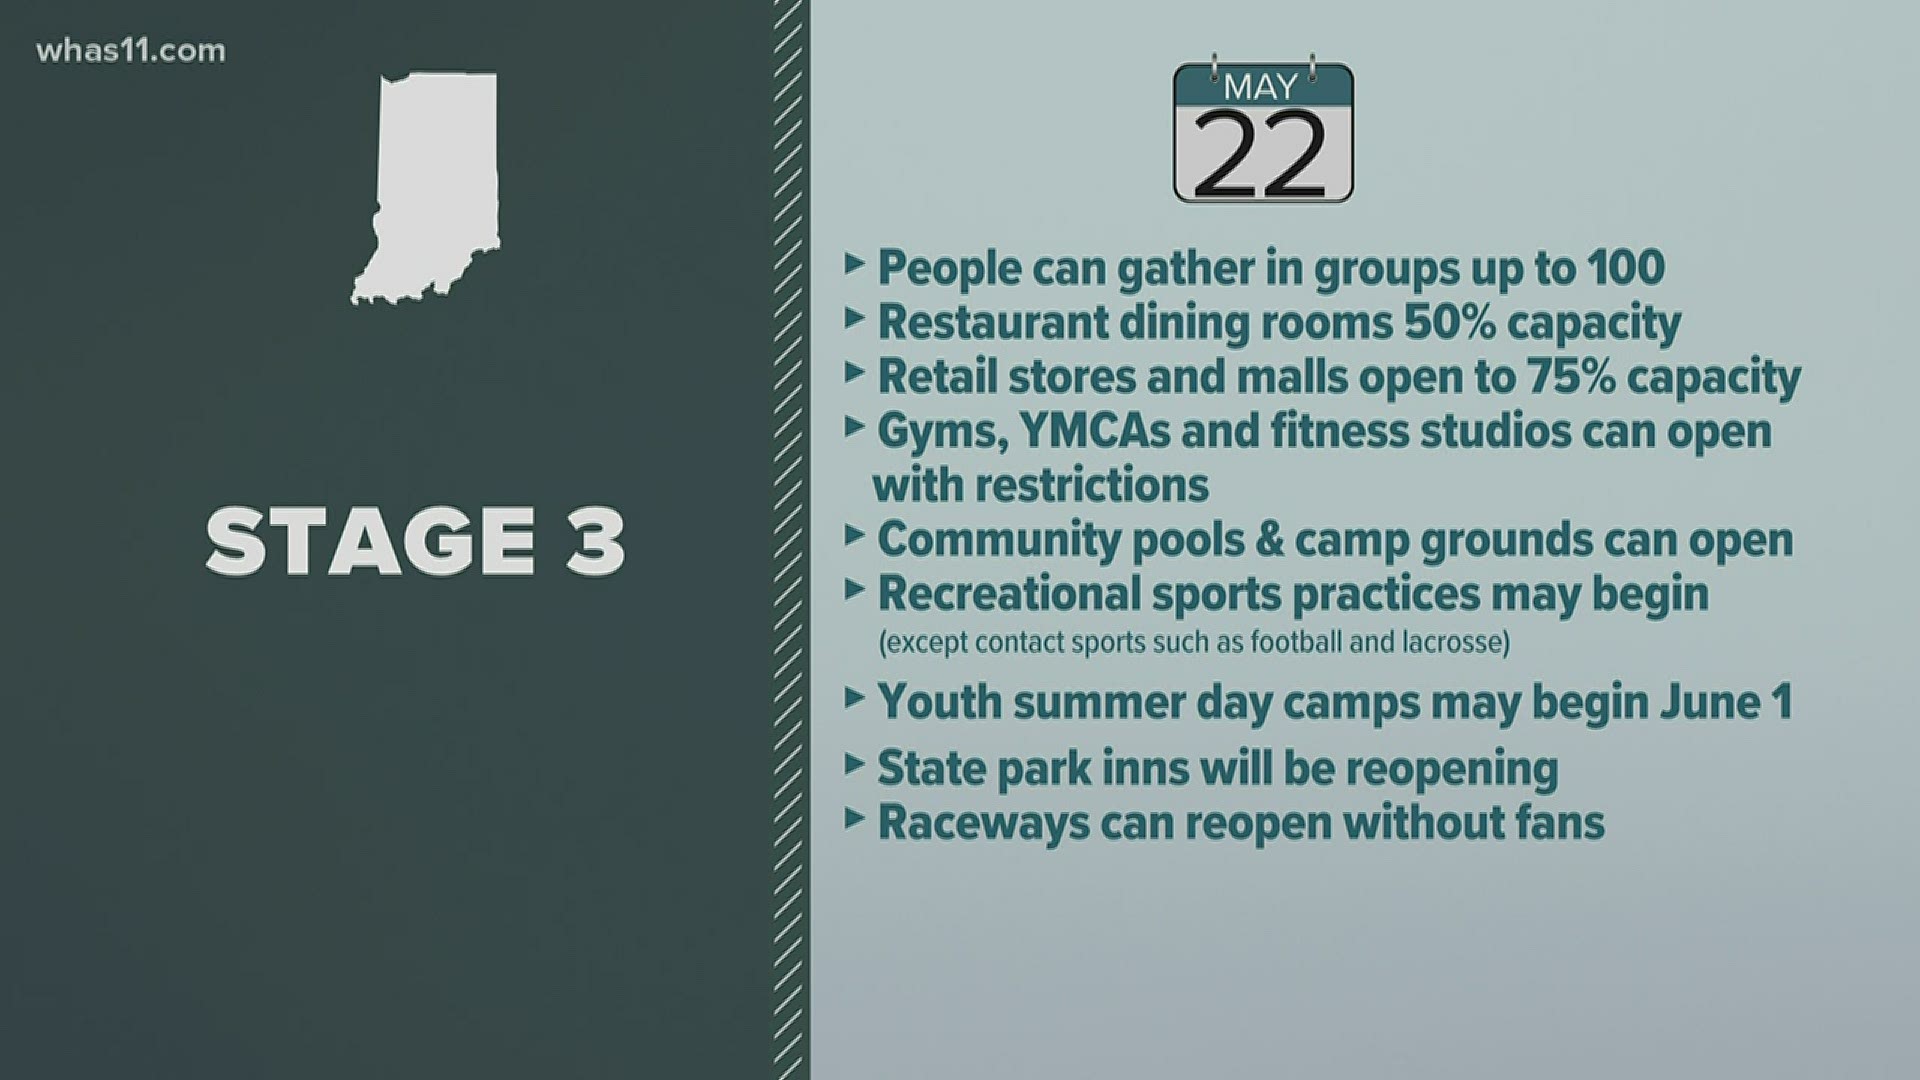 Indiana will enter Stage 3 of its reopening plan Friday, May 22.